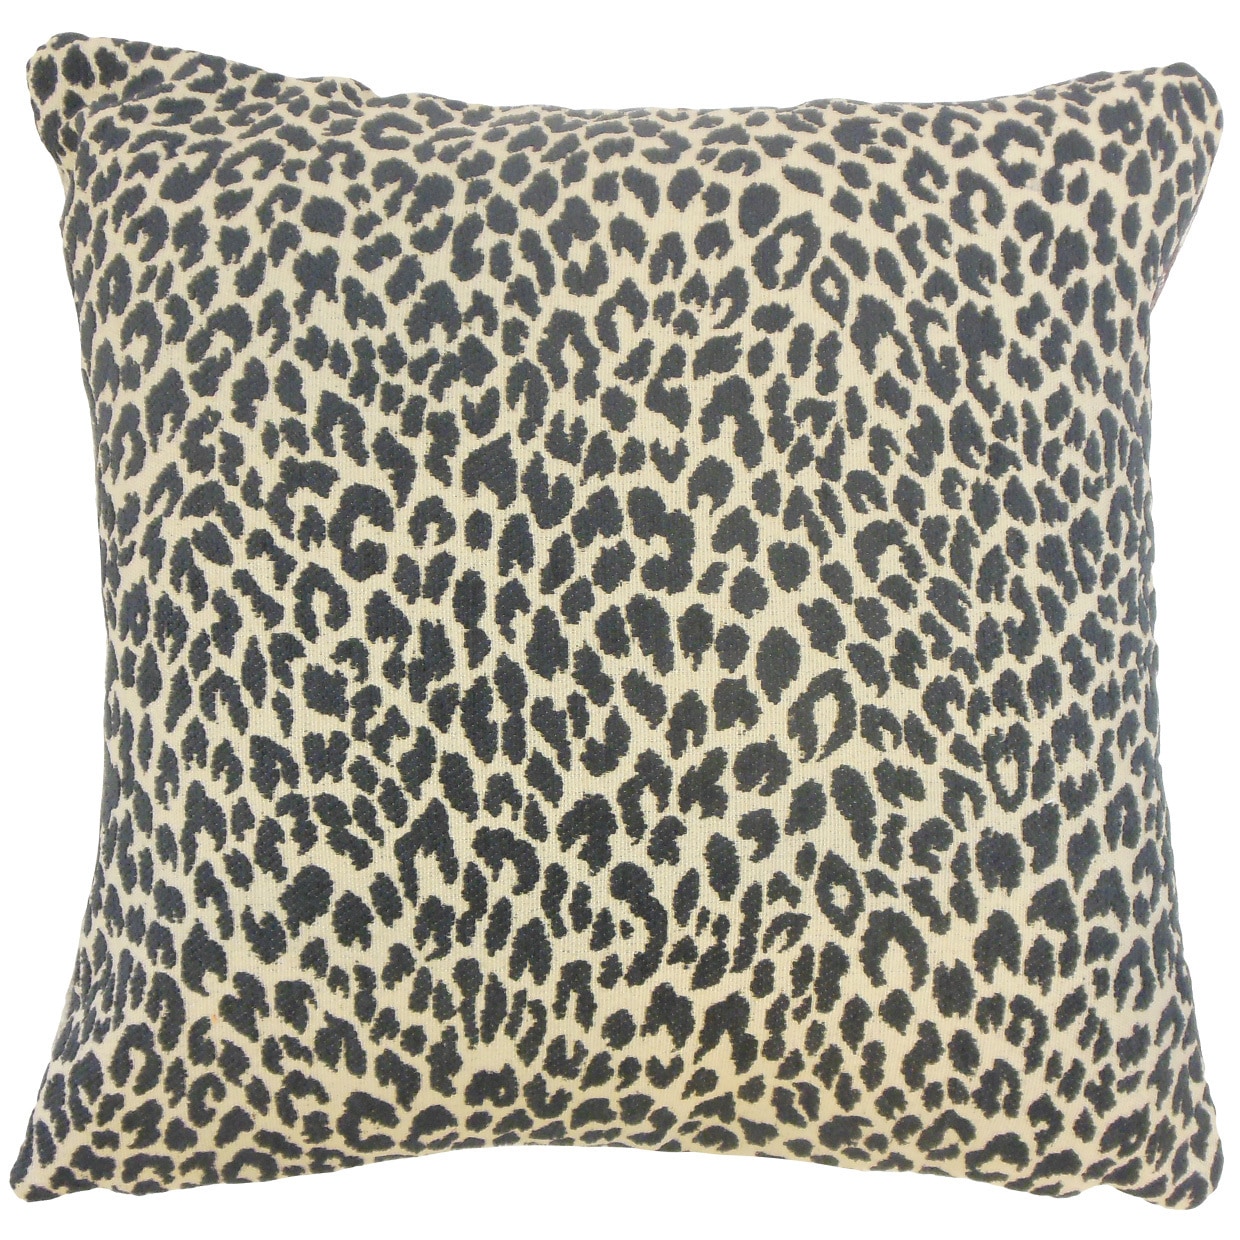 Pesach Animal Print 24-inch Feather Throw Pillow Onyx